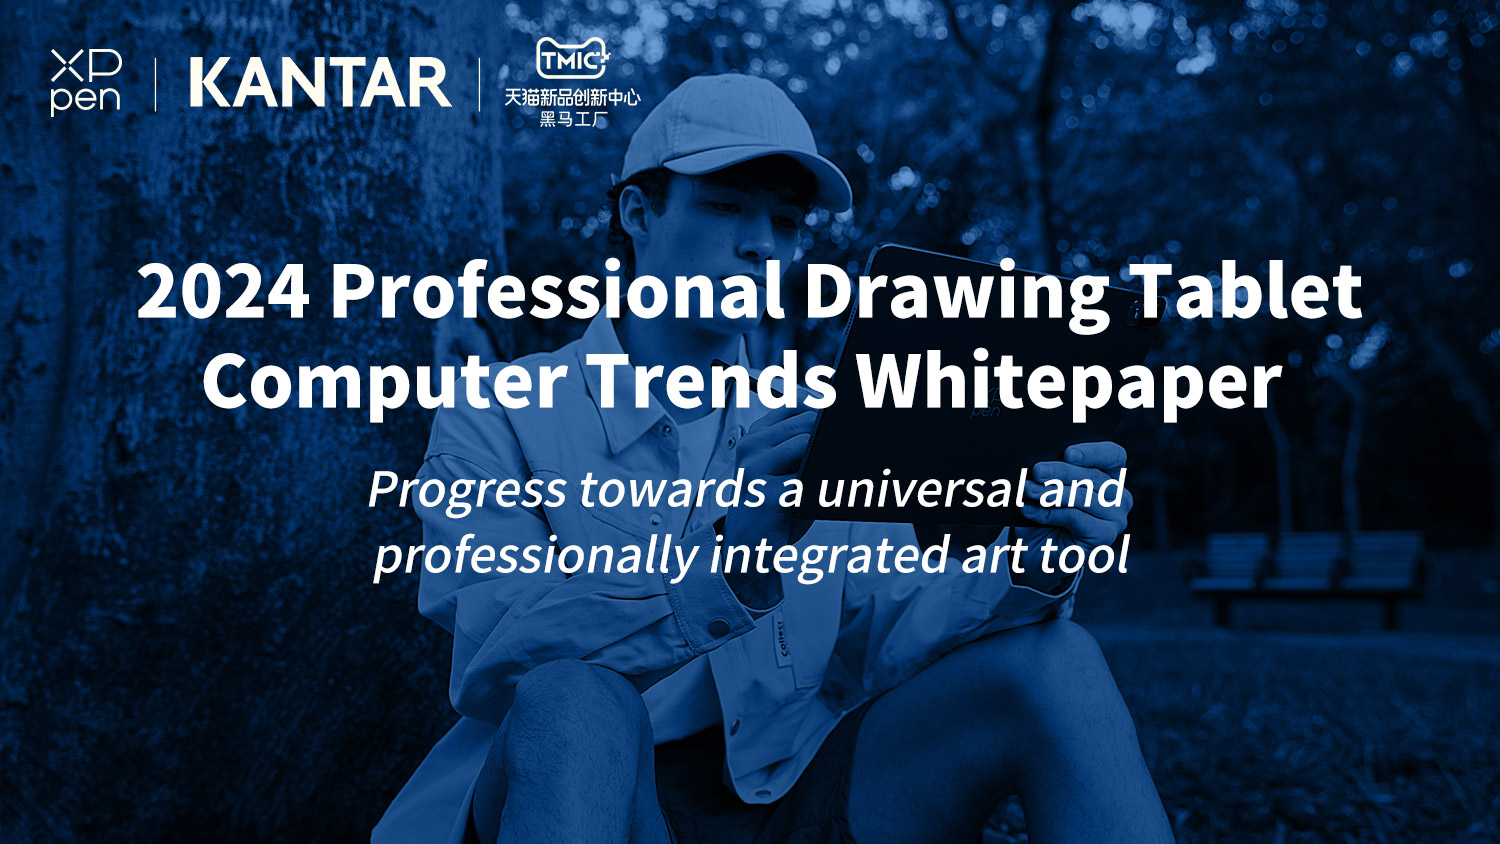 XPPen and Kantar Jointly Release 2024 Professional Drawing Tablet